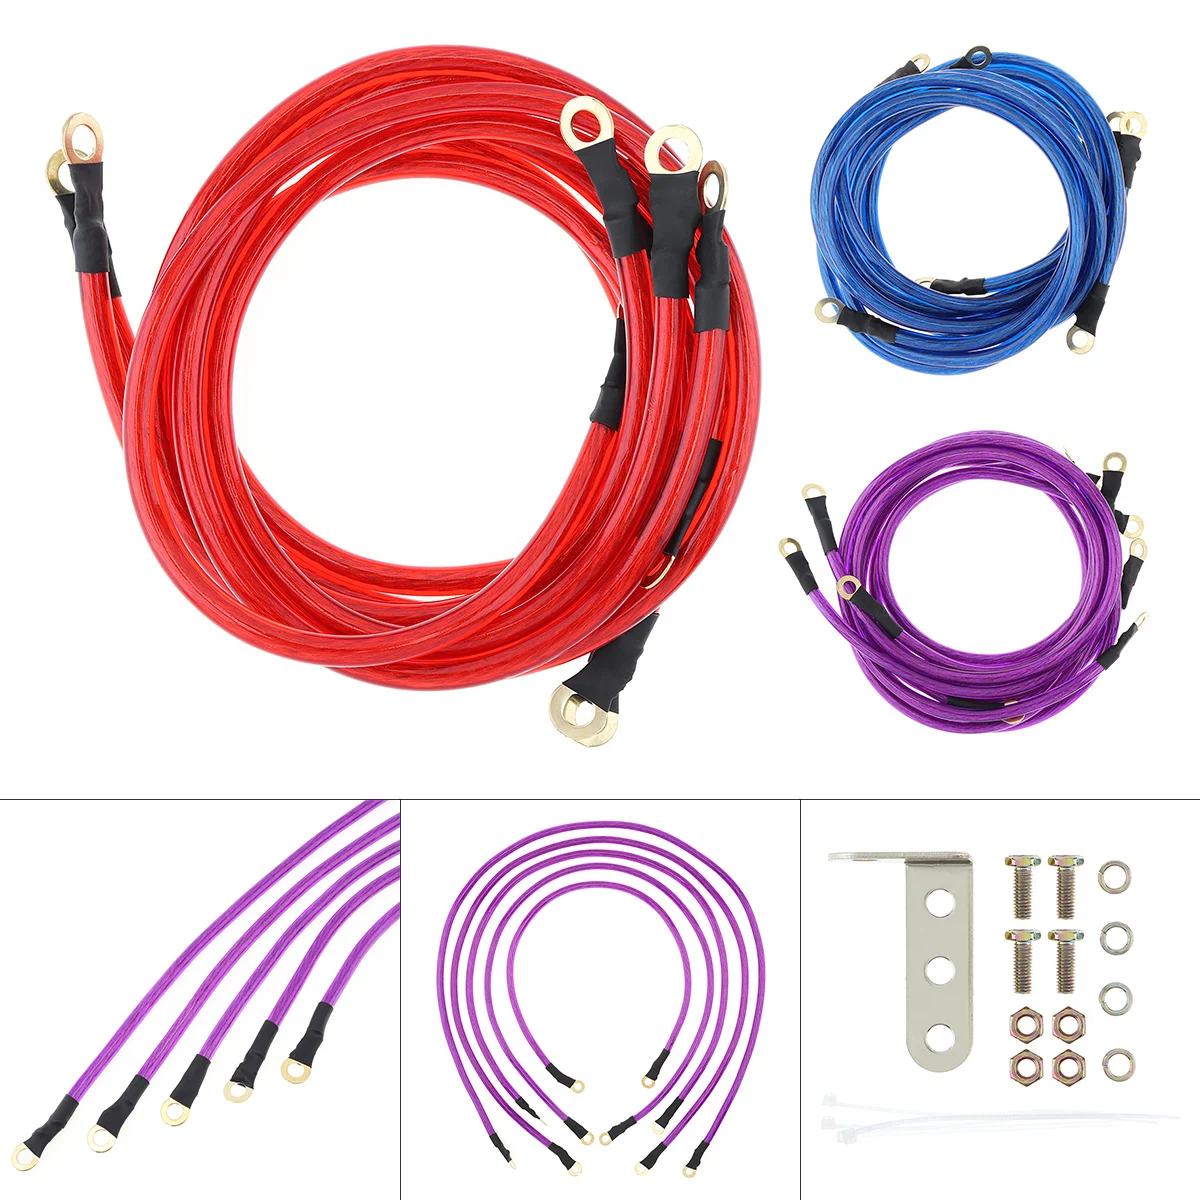 

Conversion Cables 5 Point Car Universal Earth Ground Cables Grounding Wire System Kit High Performance Improve Power